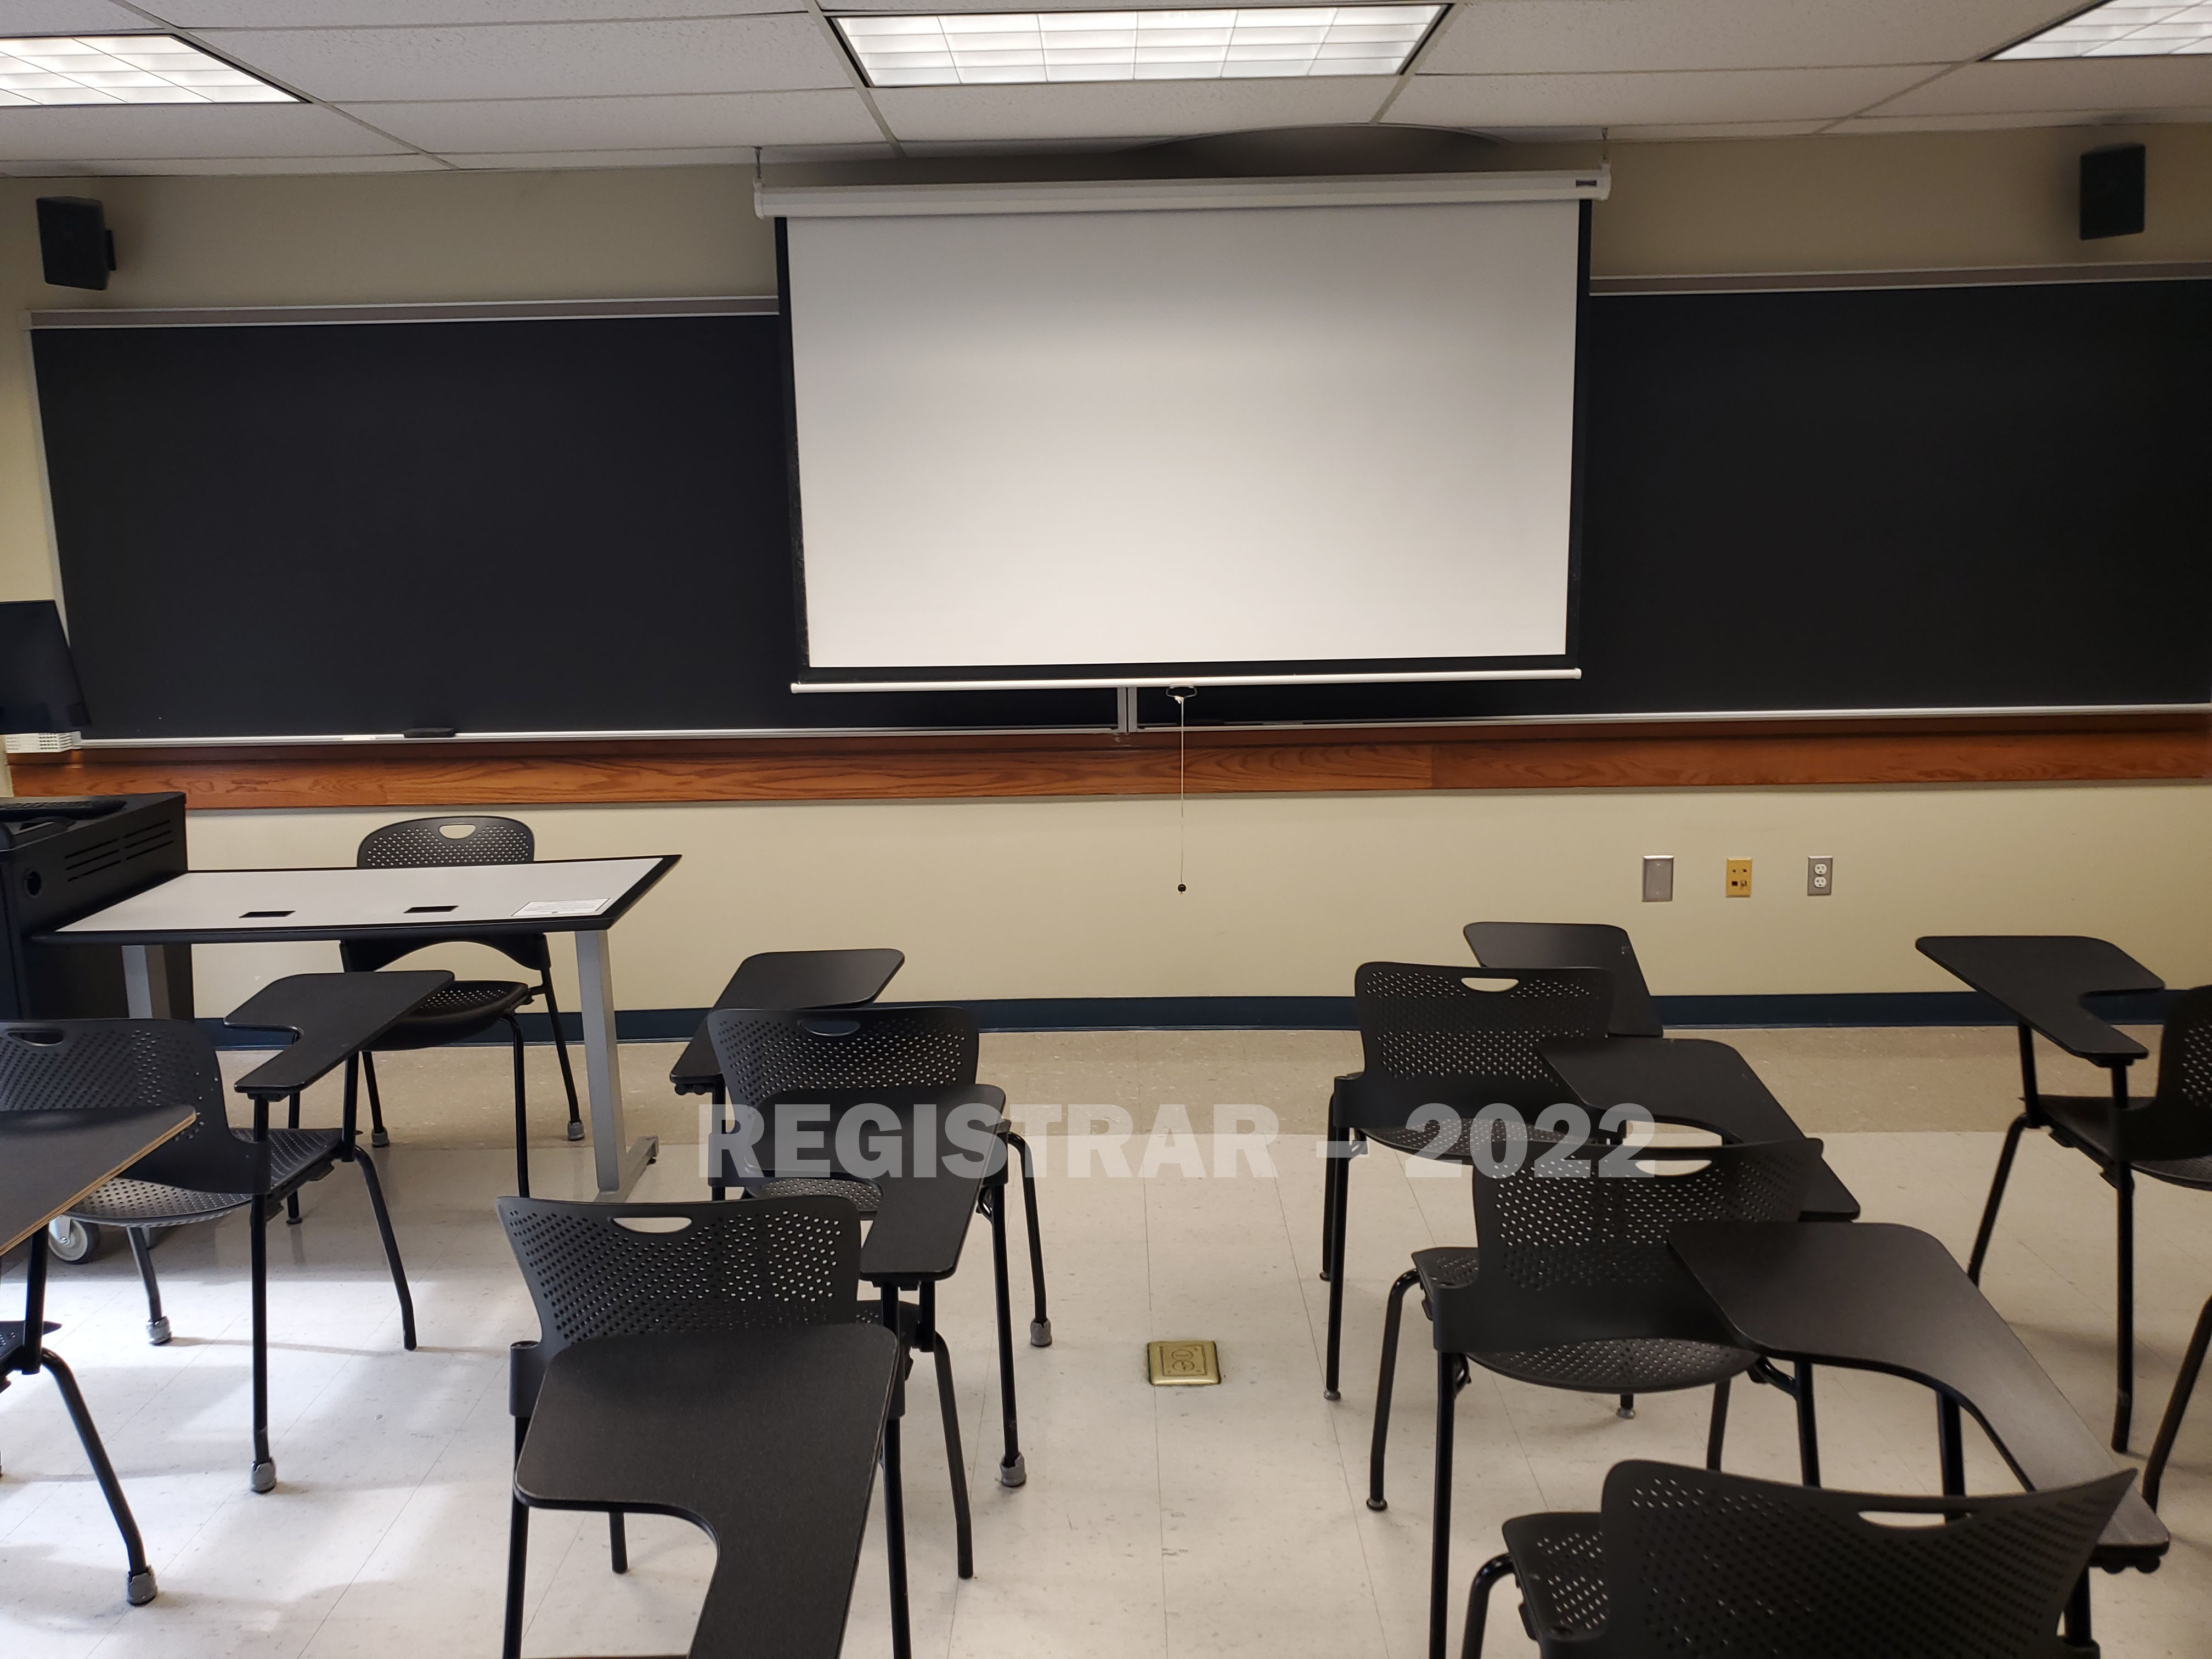 Enarson Classroom Building room 204 view from the back of the room with projector screen down